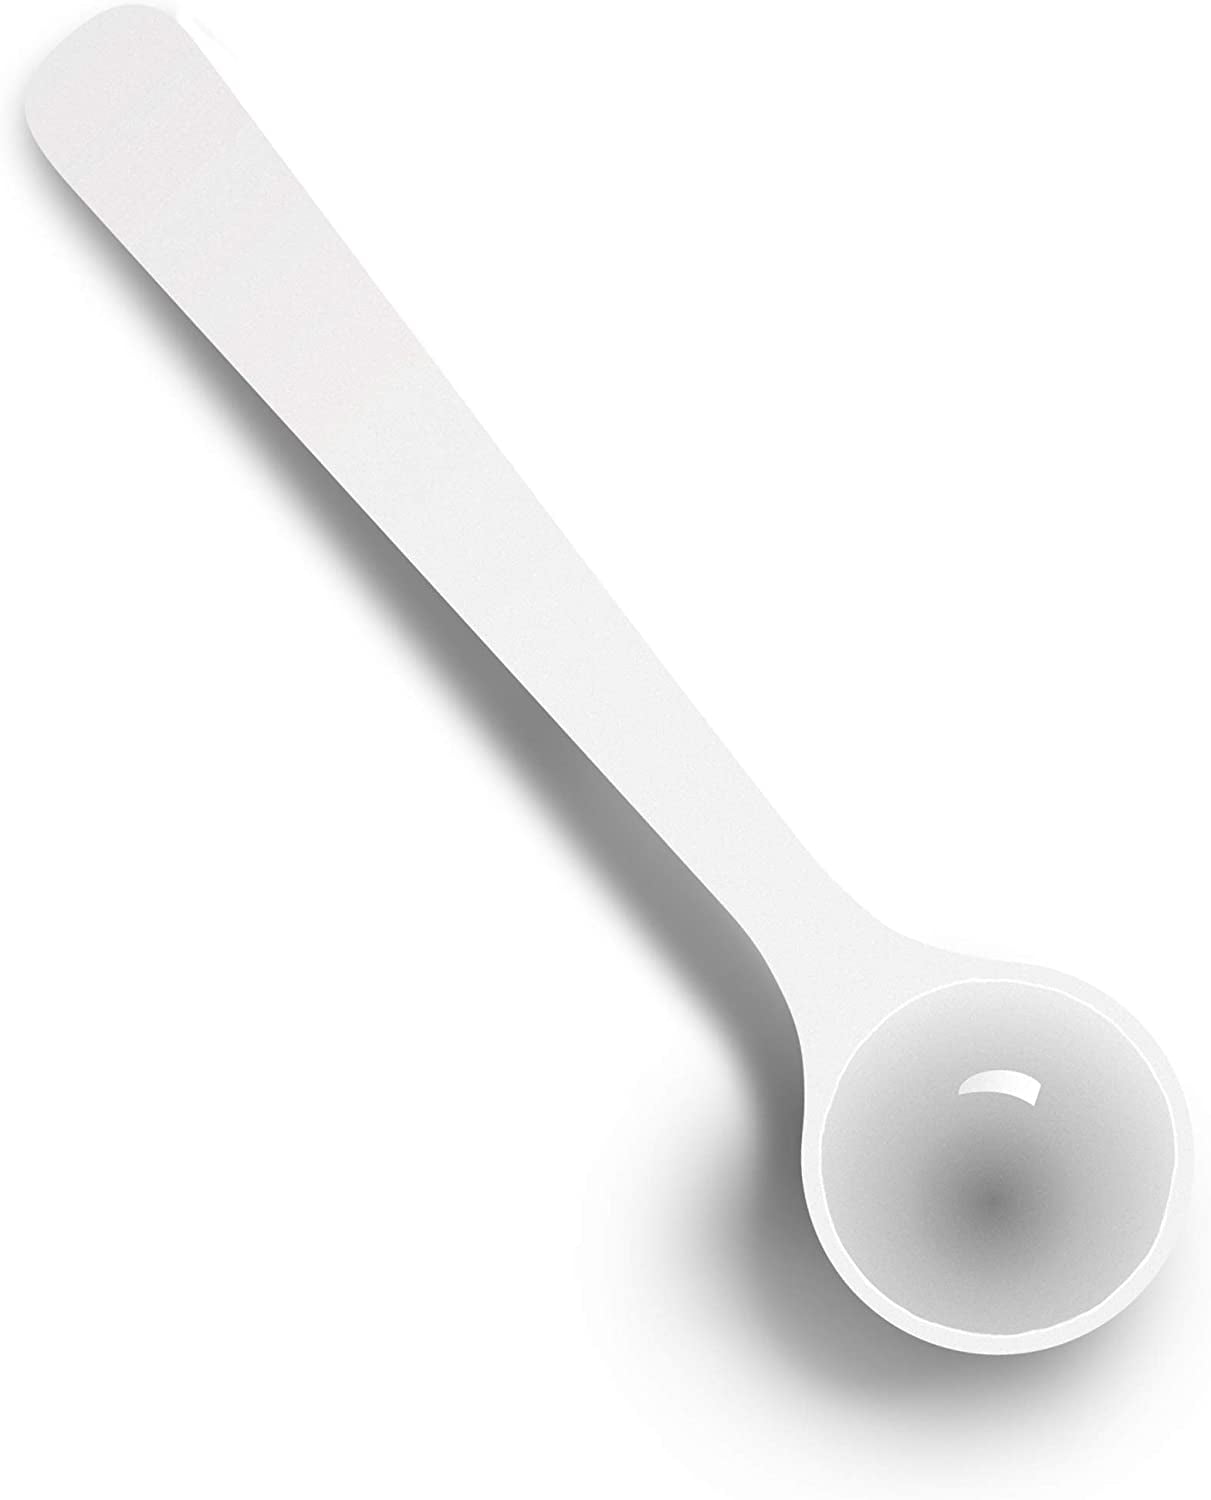 EXTEND LAB White Measuring Spoon PACK OF 10 | 1 Gram (2 Ml) | Measuring  Mini Spoons for Powder Measurement or Baking - Static-Free Plastic Tiny  Scoops